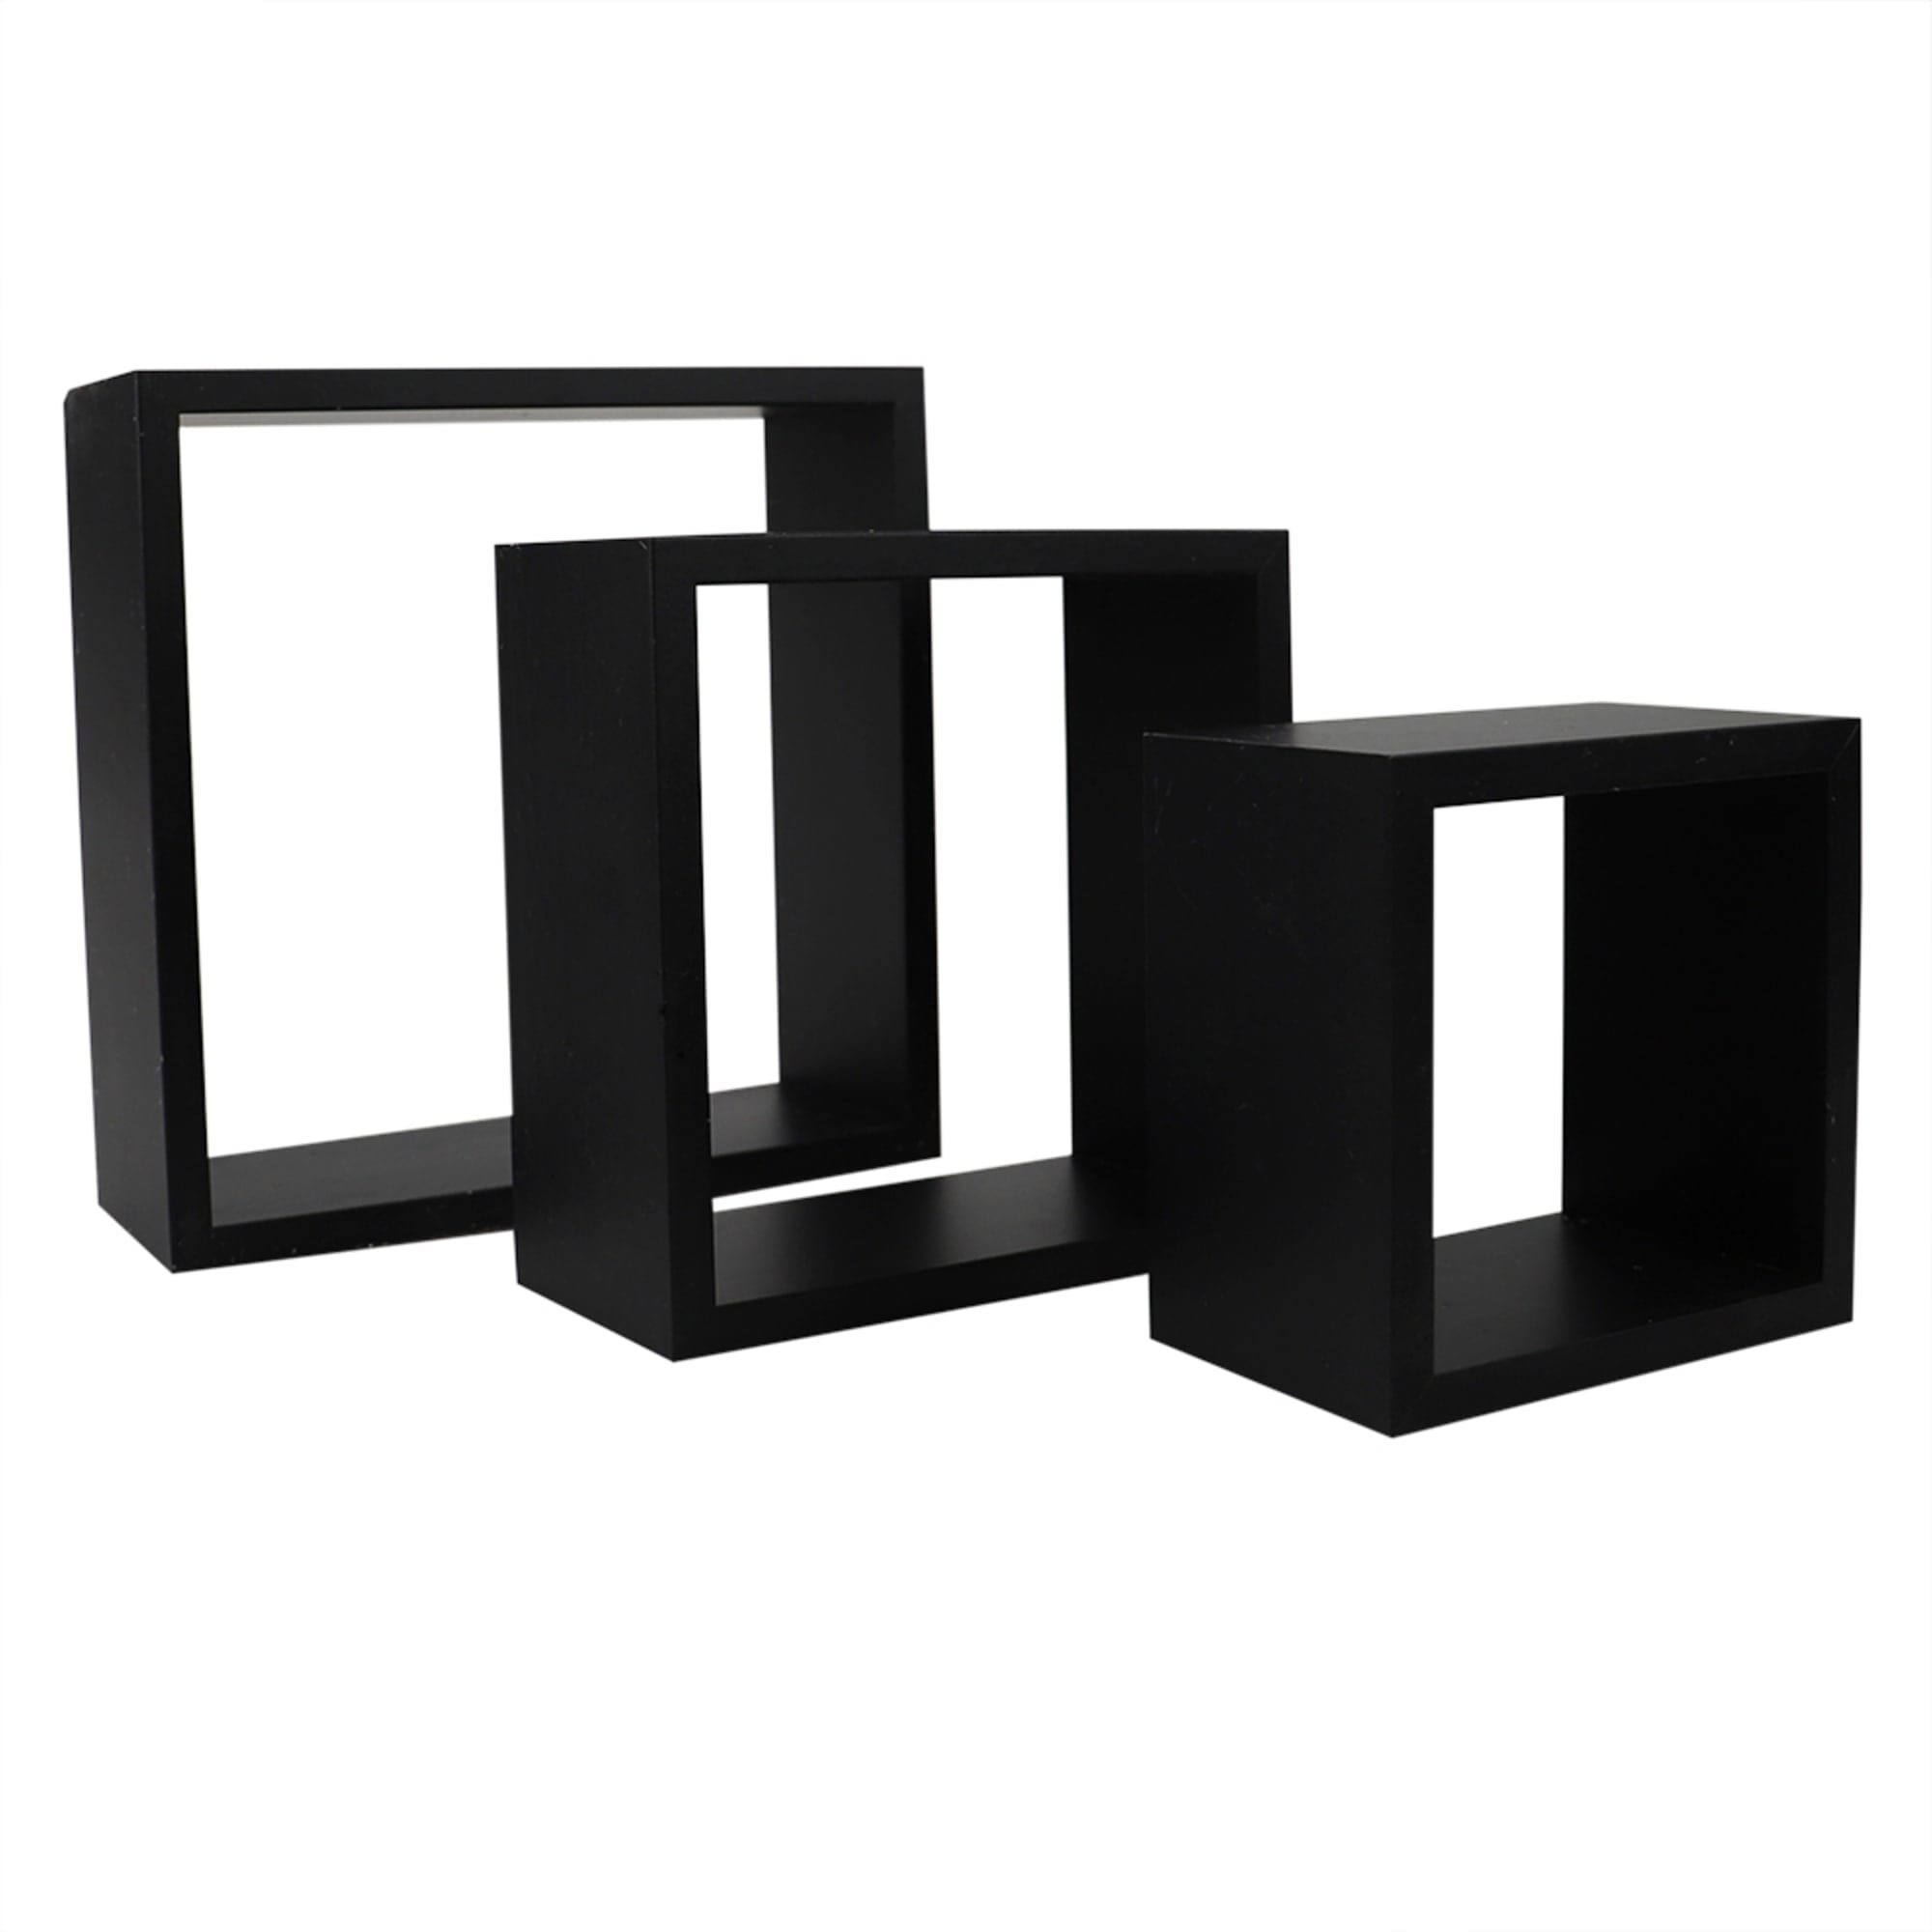 Home Basics 3 Piece MDF Floating Wall Cubes, Black $12.00 EACH, CASE PACK OF 6